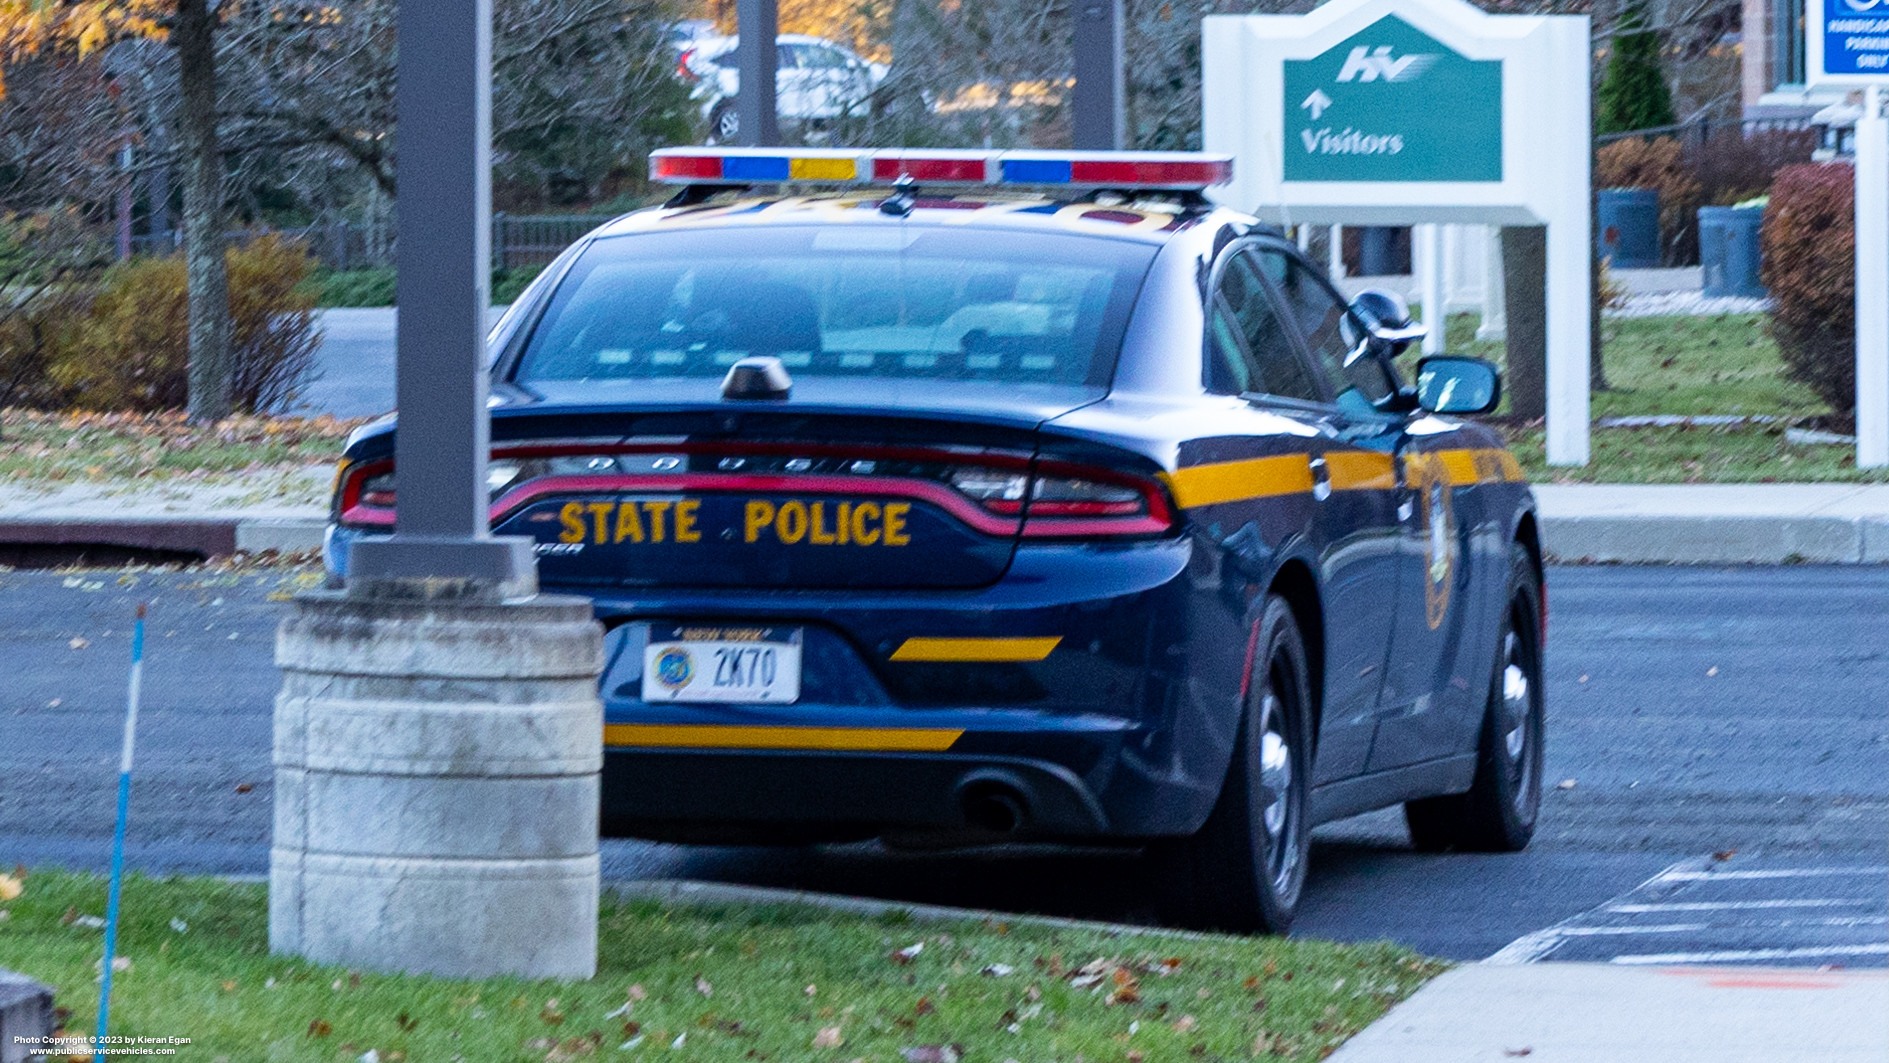 A photo  of New York State Police
            Cruiser 2K70, a 2015-2022 Dodge Charger             taken by Kieran Egan